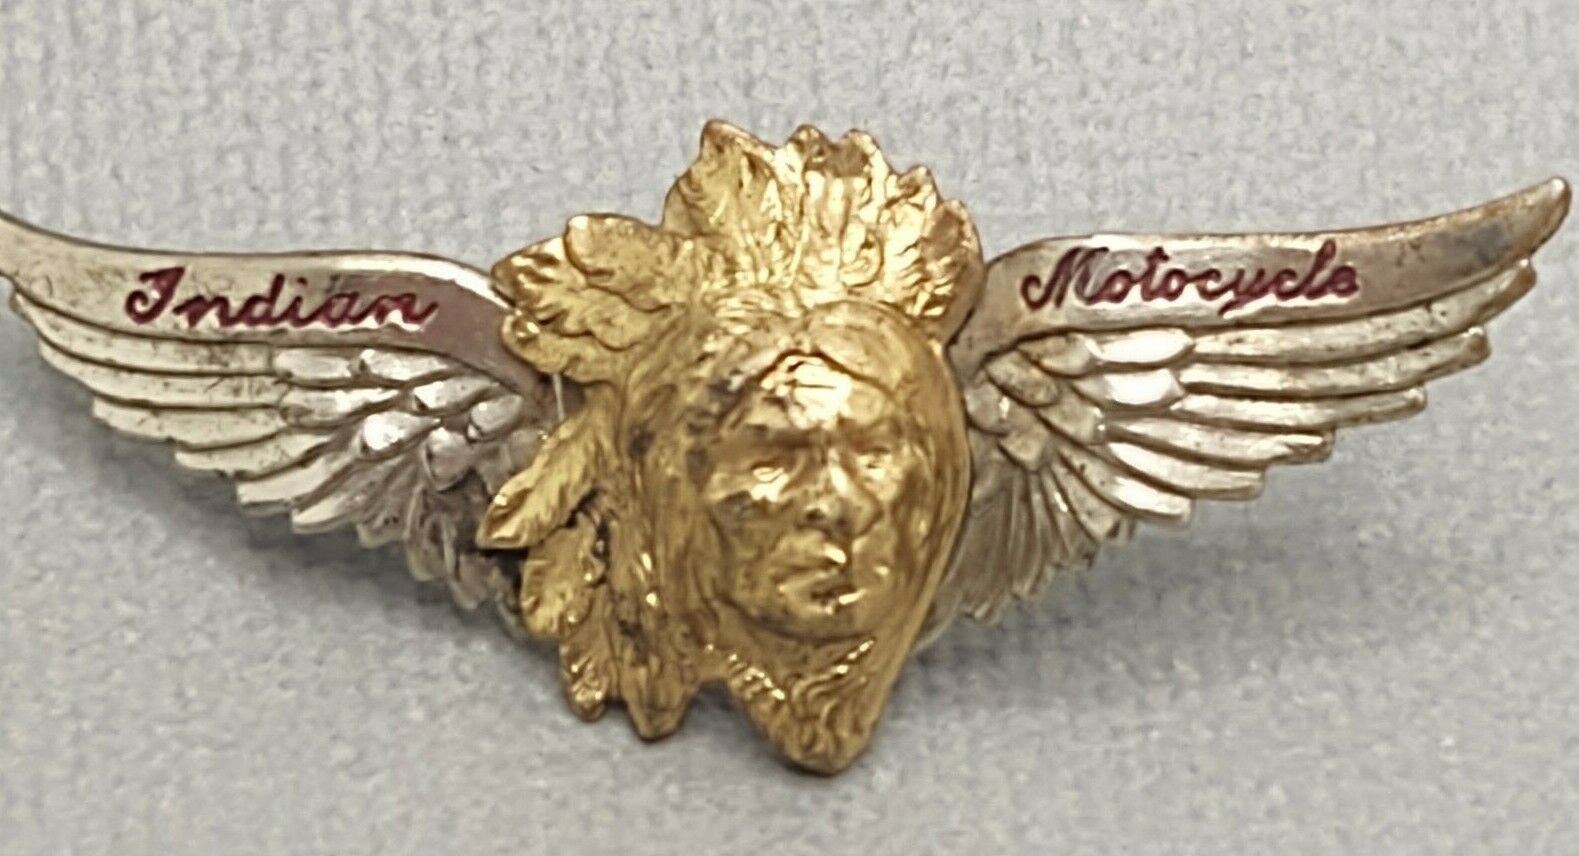 VINTAGE INDIAN MOTOCYCLE CHIEF WINGS PIN 2'' MOTORCYCLE CURVED